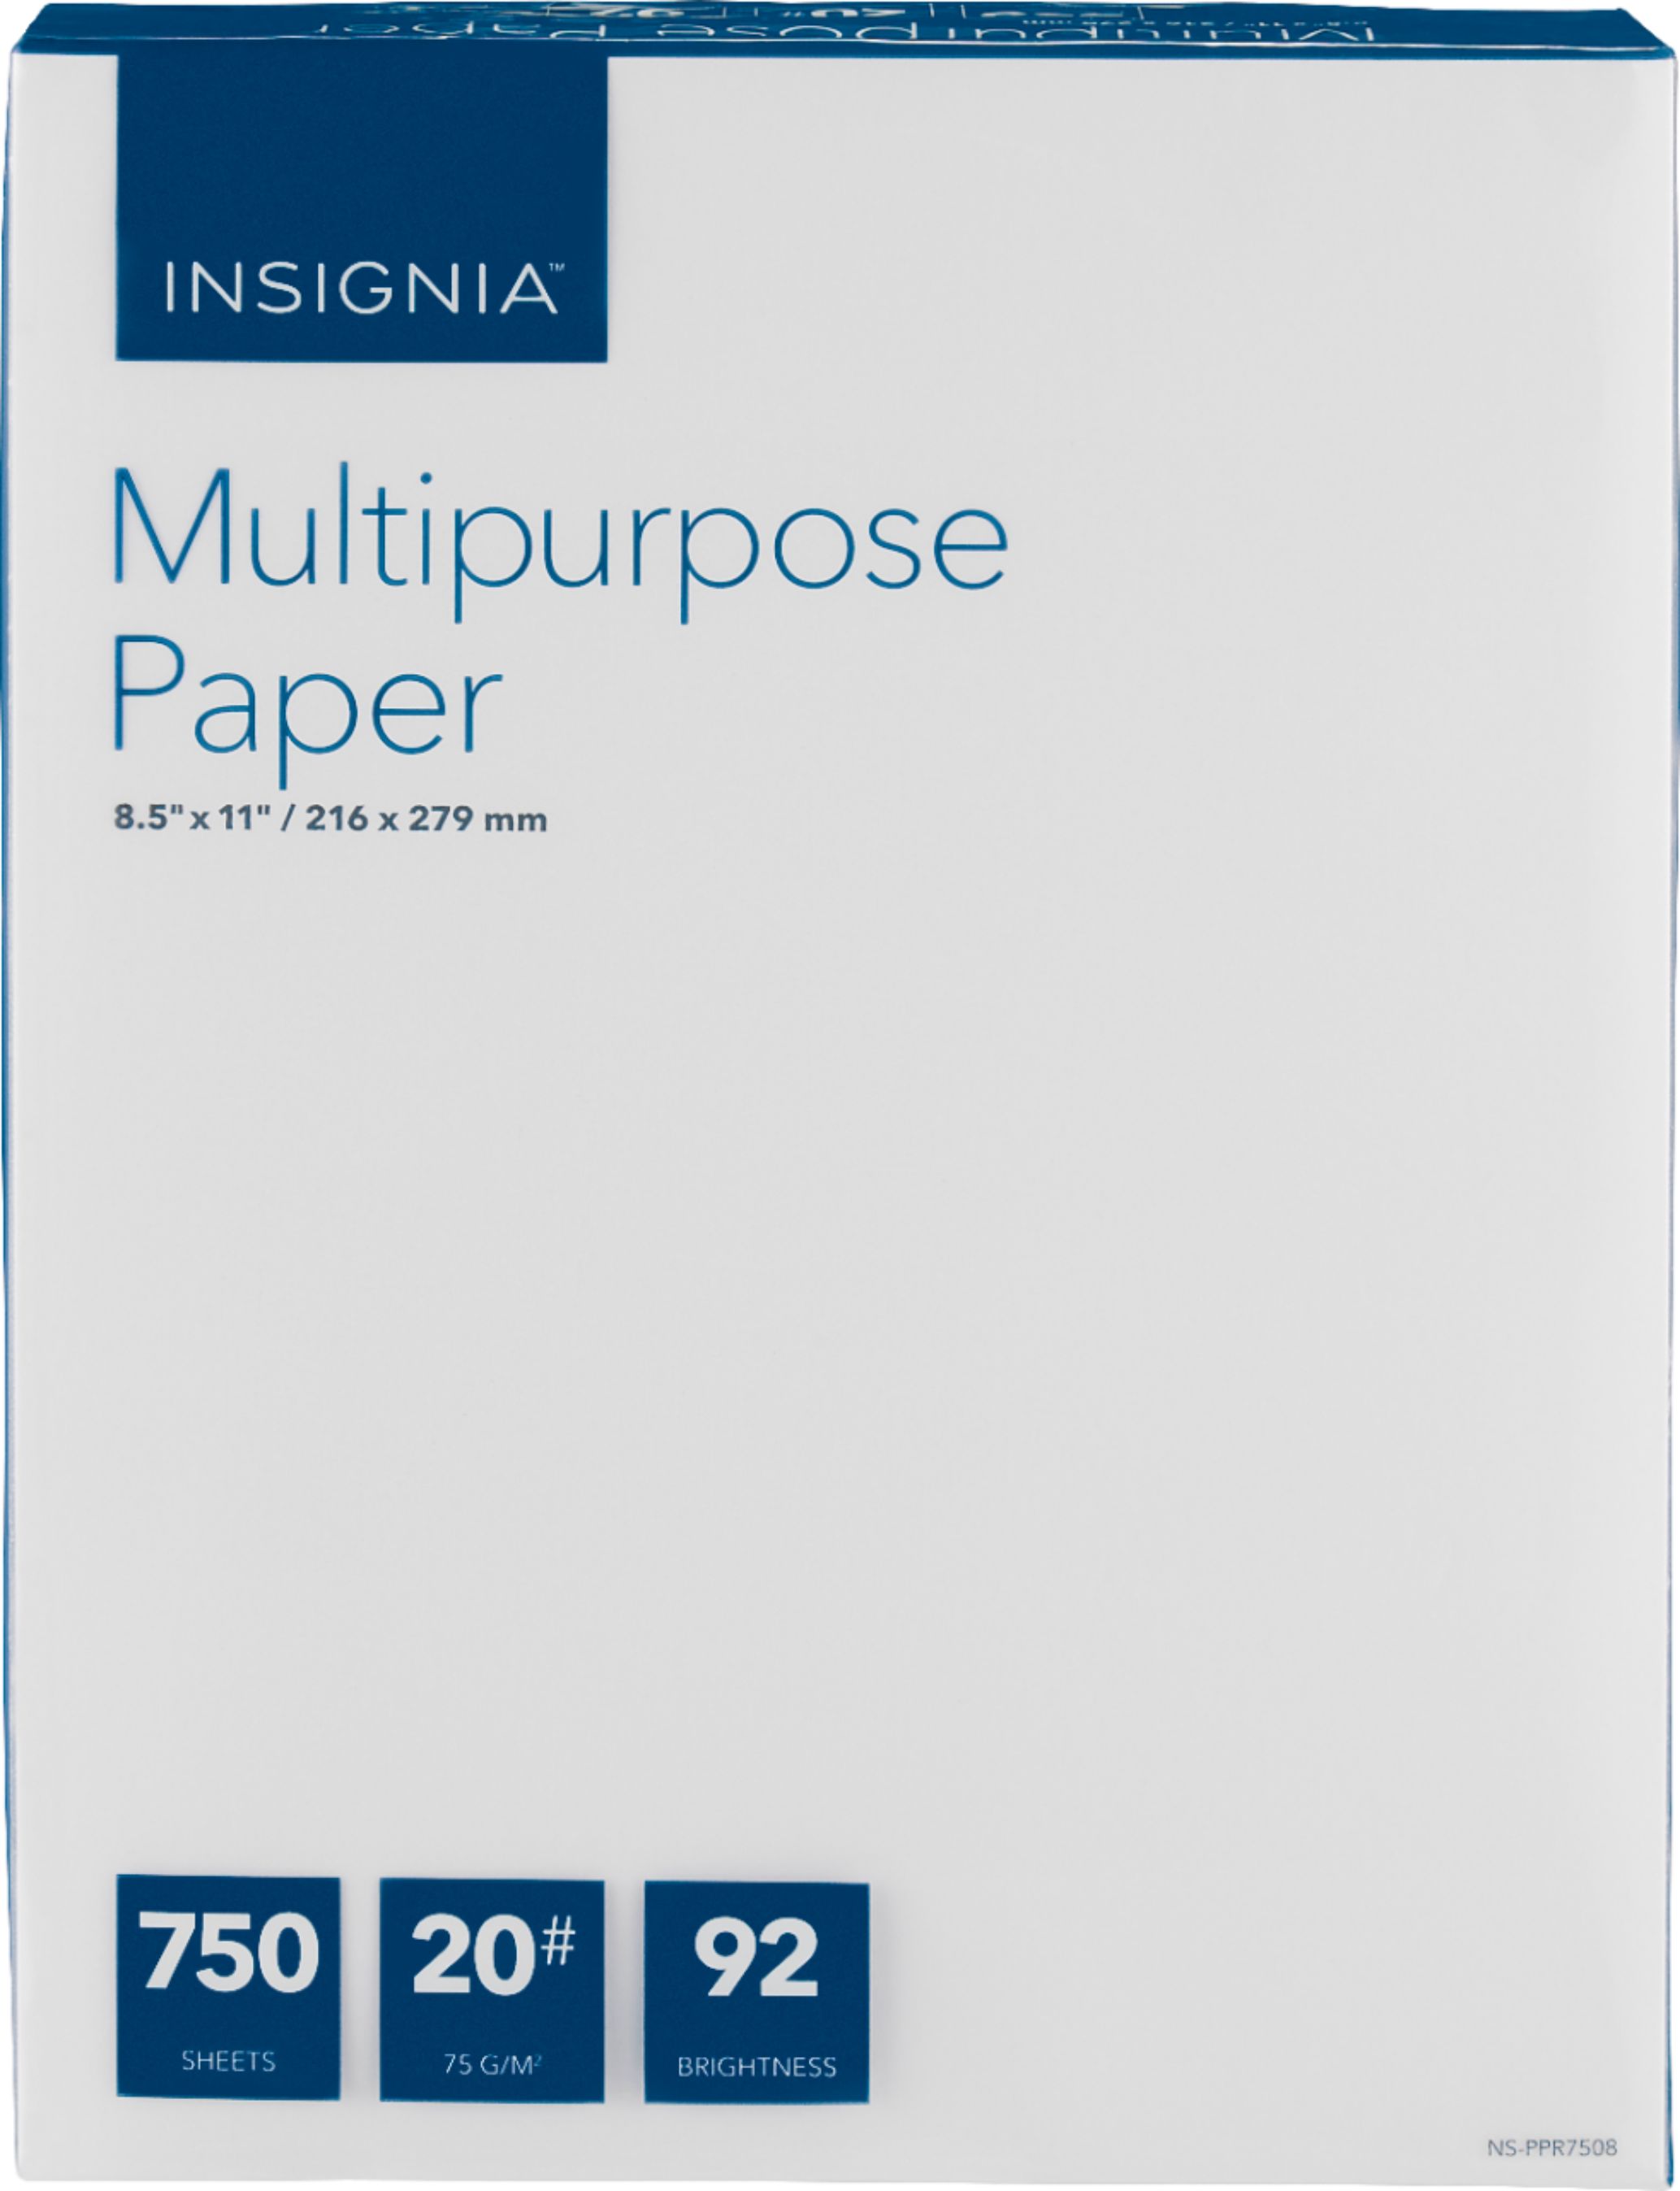 Hammermill Multi-Purpose Outlet Copy Paper, 8 1/2'' x 11'', 92